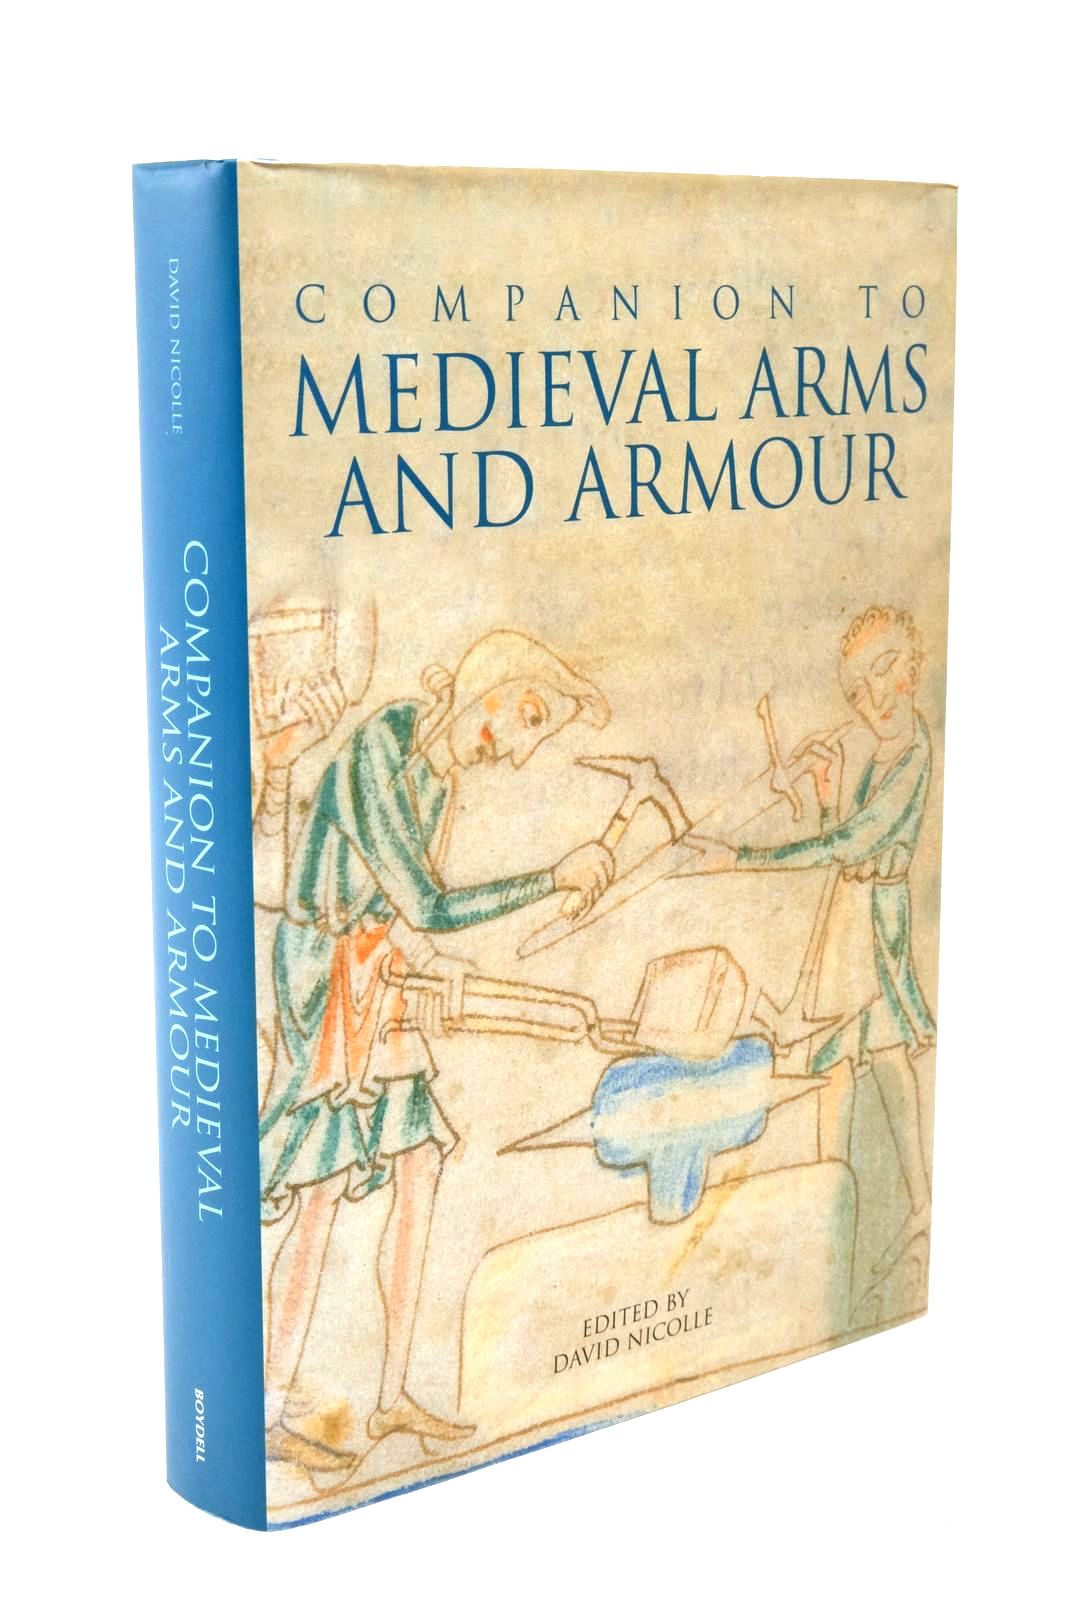 Photo of COMPANION TO MEDIEVAL ARMS AND ARMOUR written by Nicolle, David published by The Boydell Press (STOCK CODE: 1322593)  for sale by Stella & Rose's Books